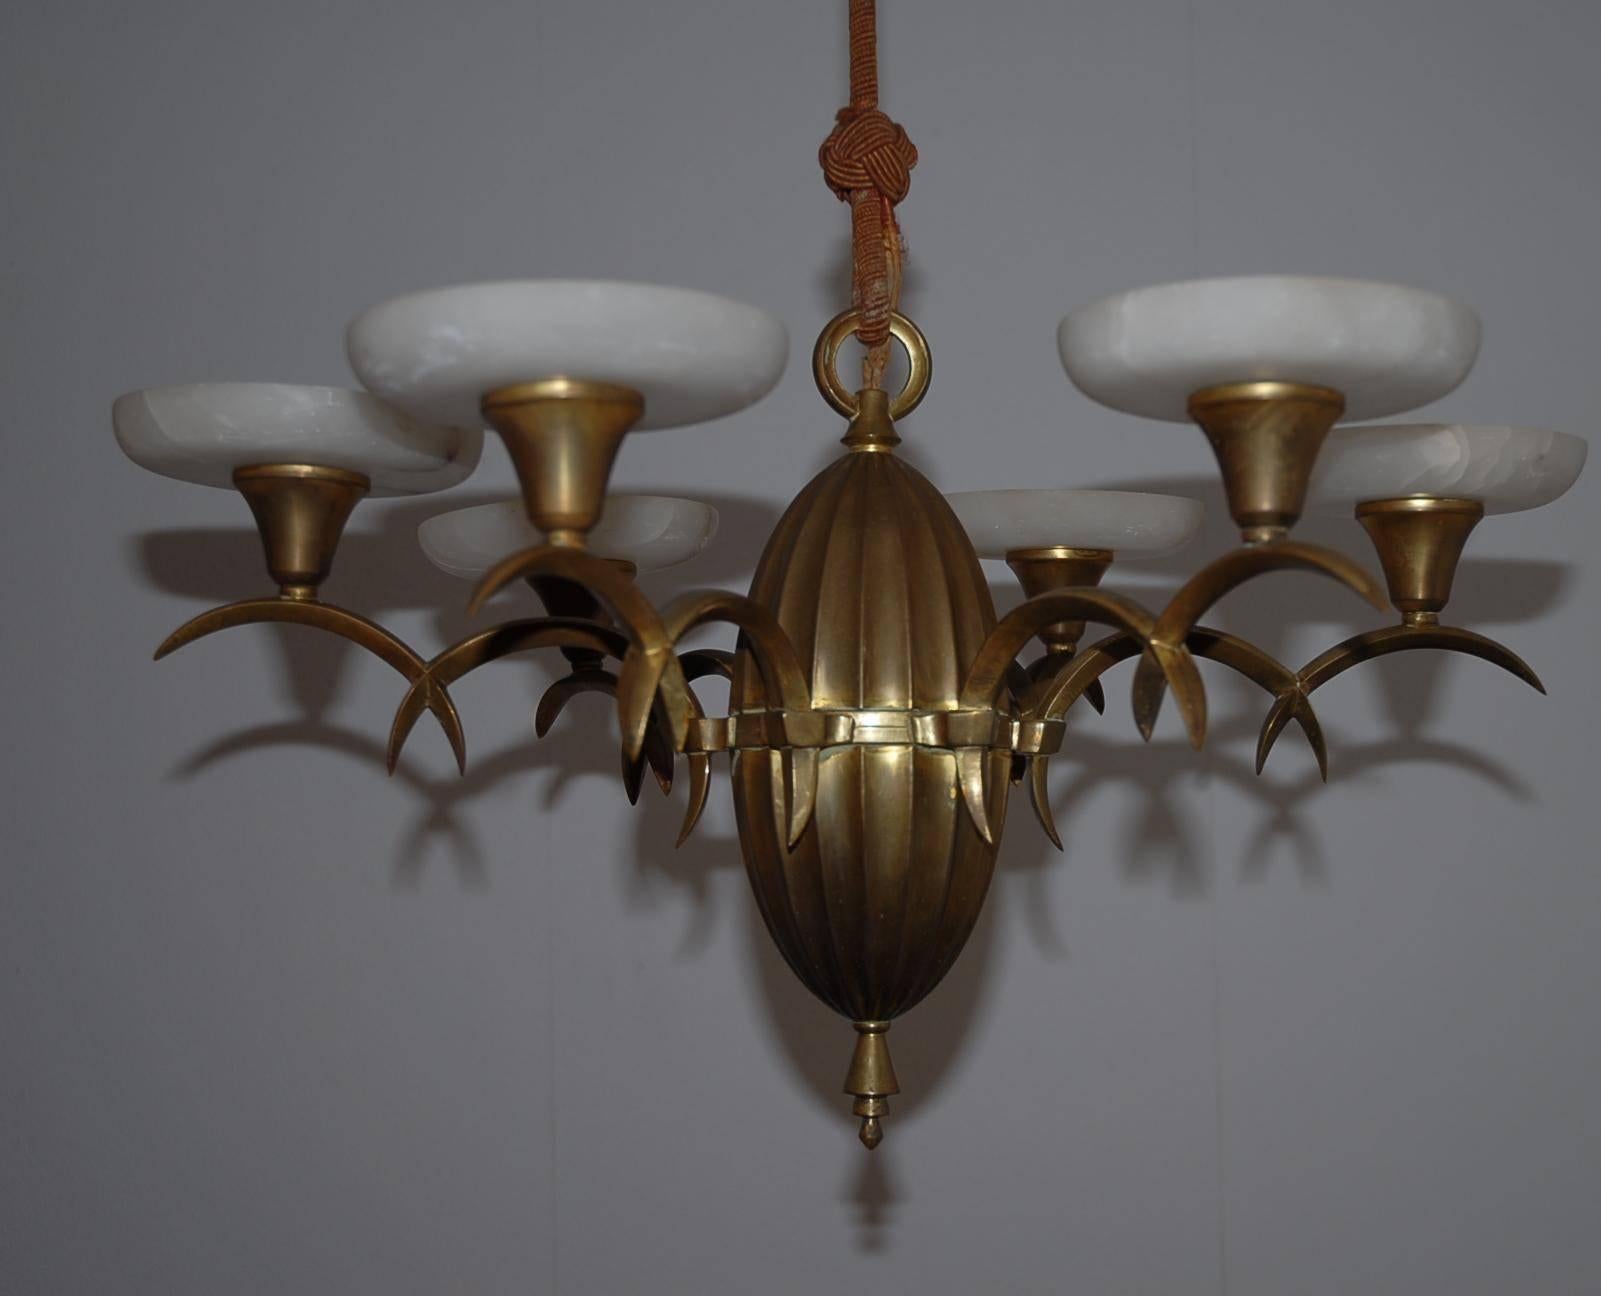 Original condition with rope and six alabaster shades.

Dagobert Peche (1887-1923)
This rare design six-arm pendant is in excellent condition and in good working order. Timeless, Art Deco designs like these fit in all kinds of interiors and the